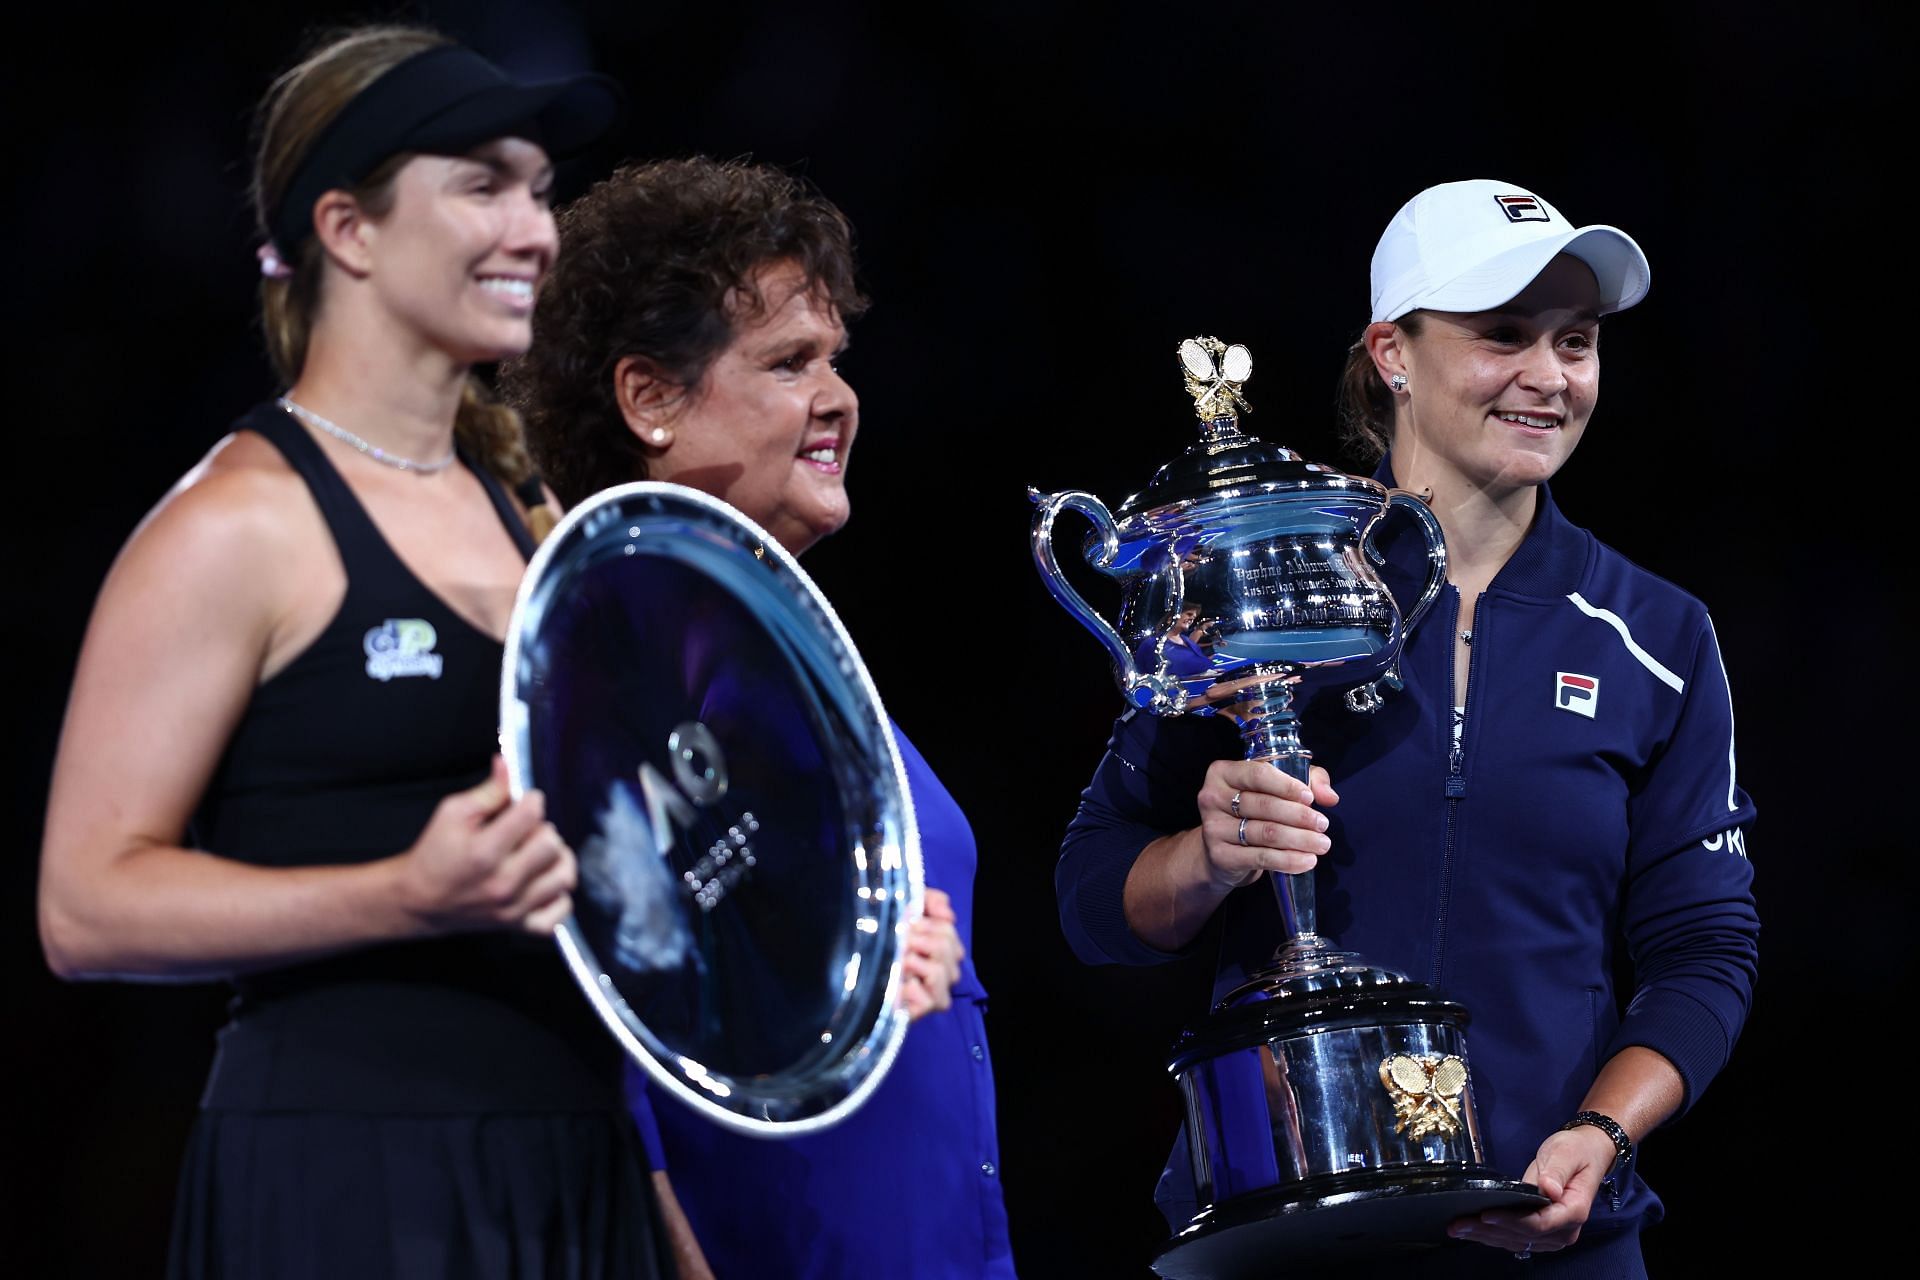 Danielle Collins and Ashleigh Barty at the 2022 trophy presentation ceremony.